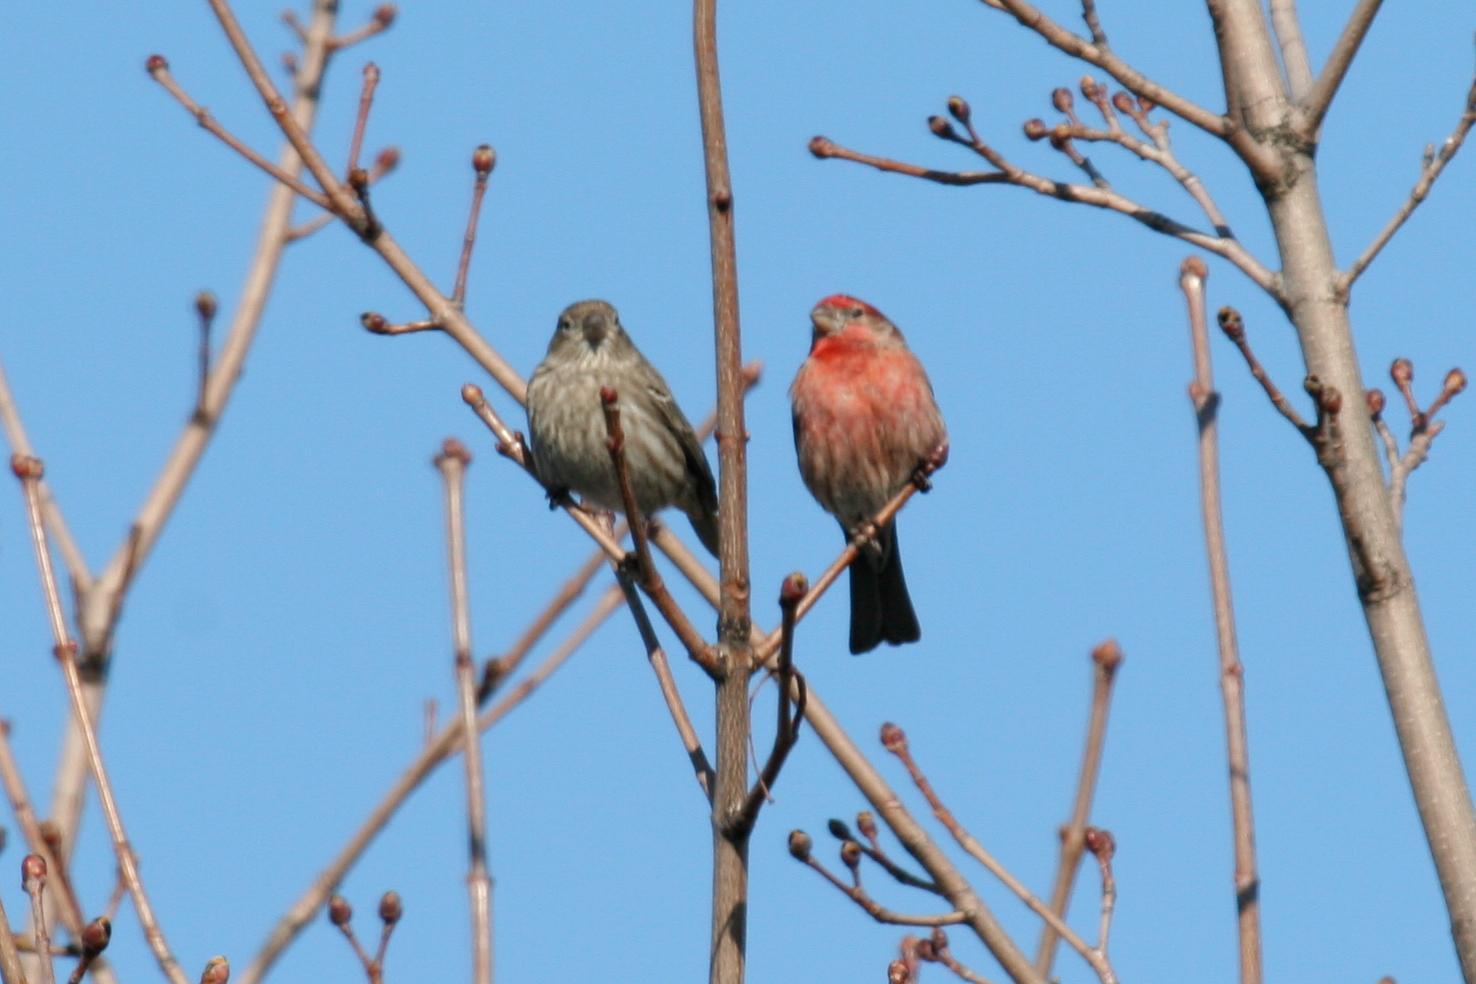 House Finch Photo by Roseanne CALECA